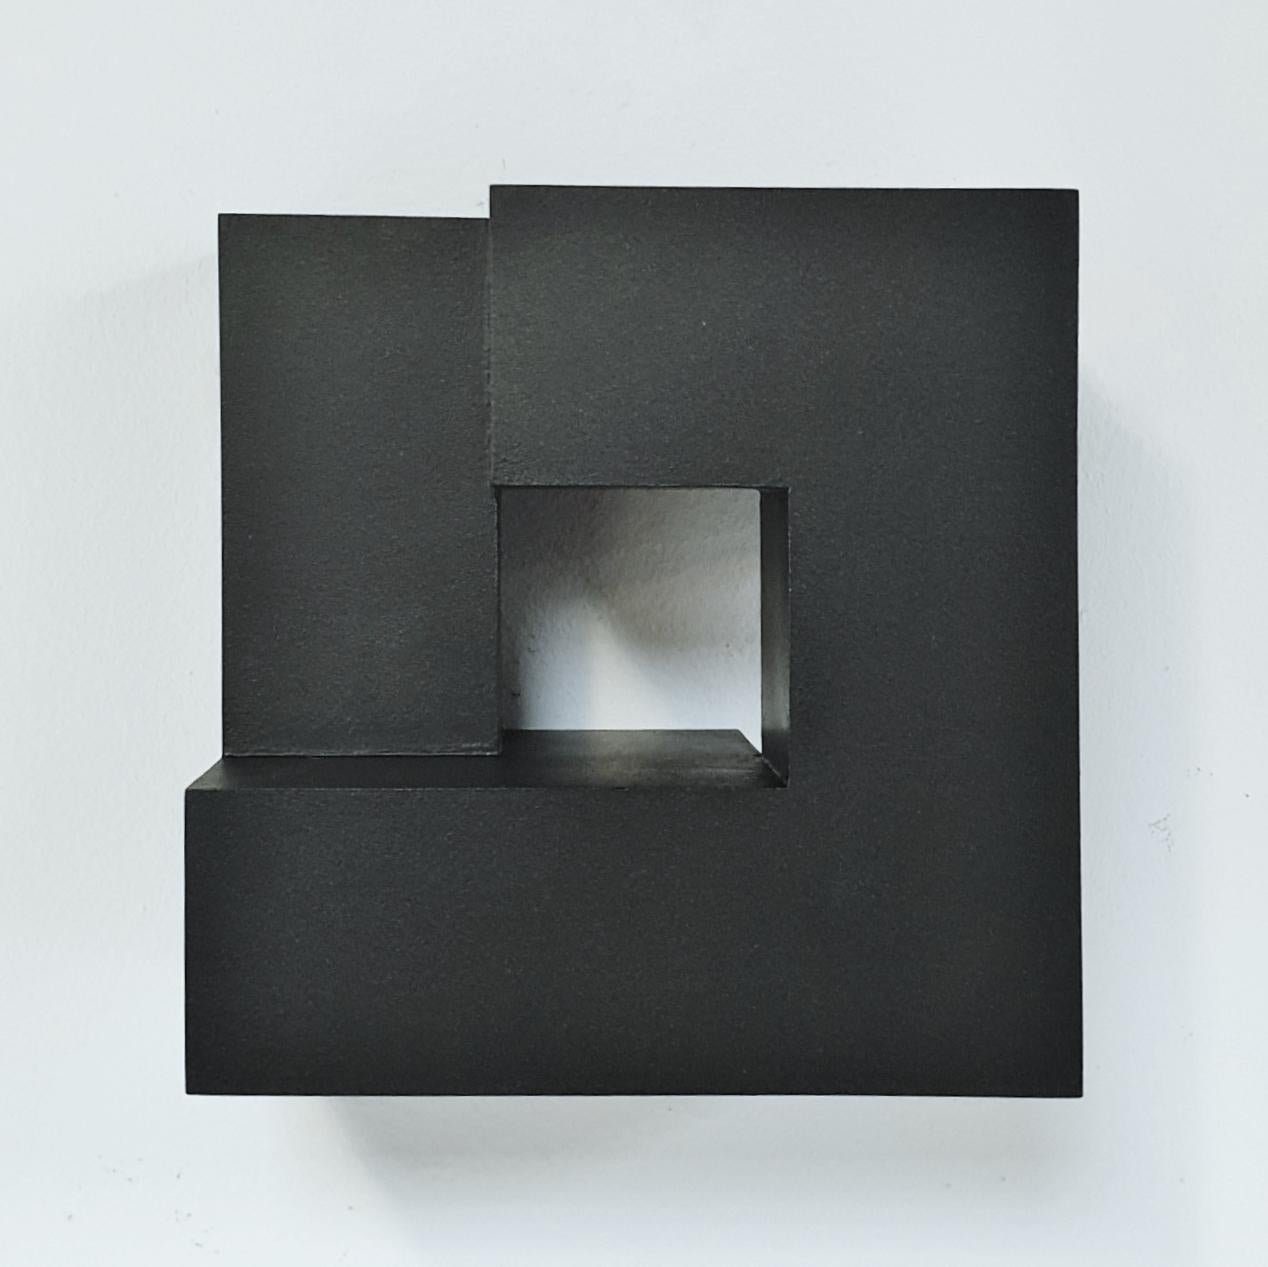 Carré architectural III no. 5/15 - contemporary modern abstract wall sculpture - Abstract Geometric Sculpture by Olivier Julia